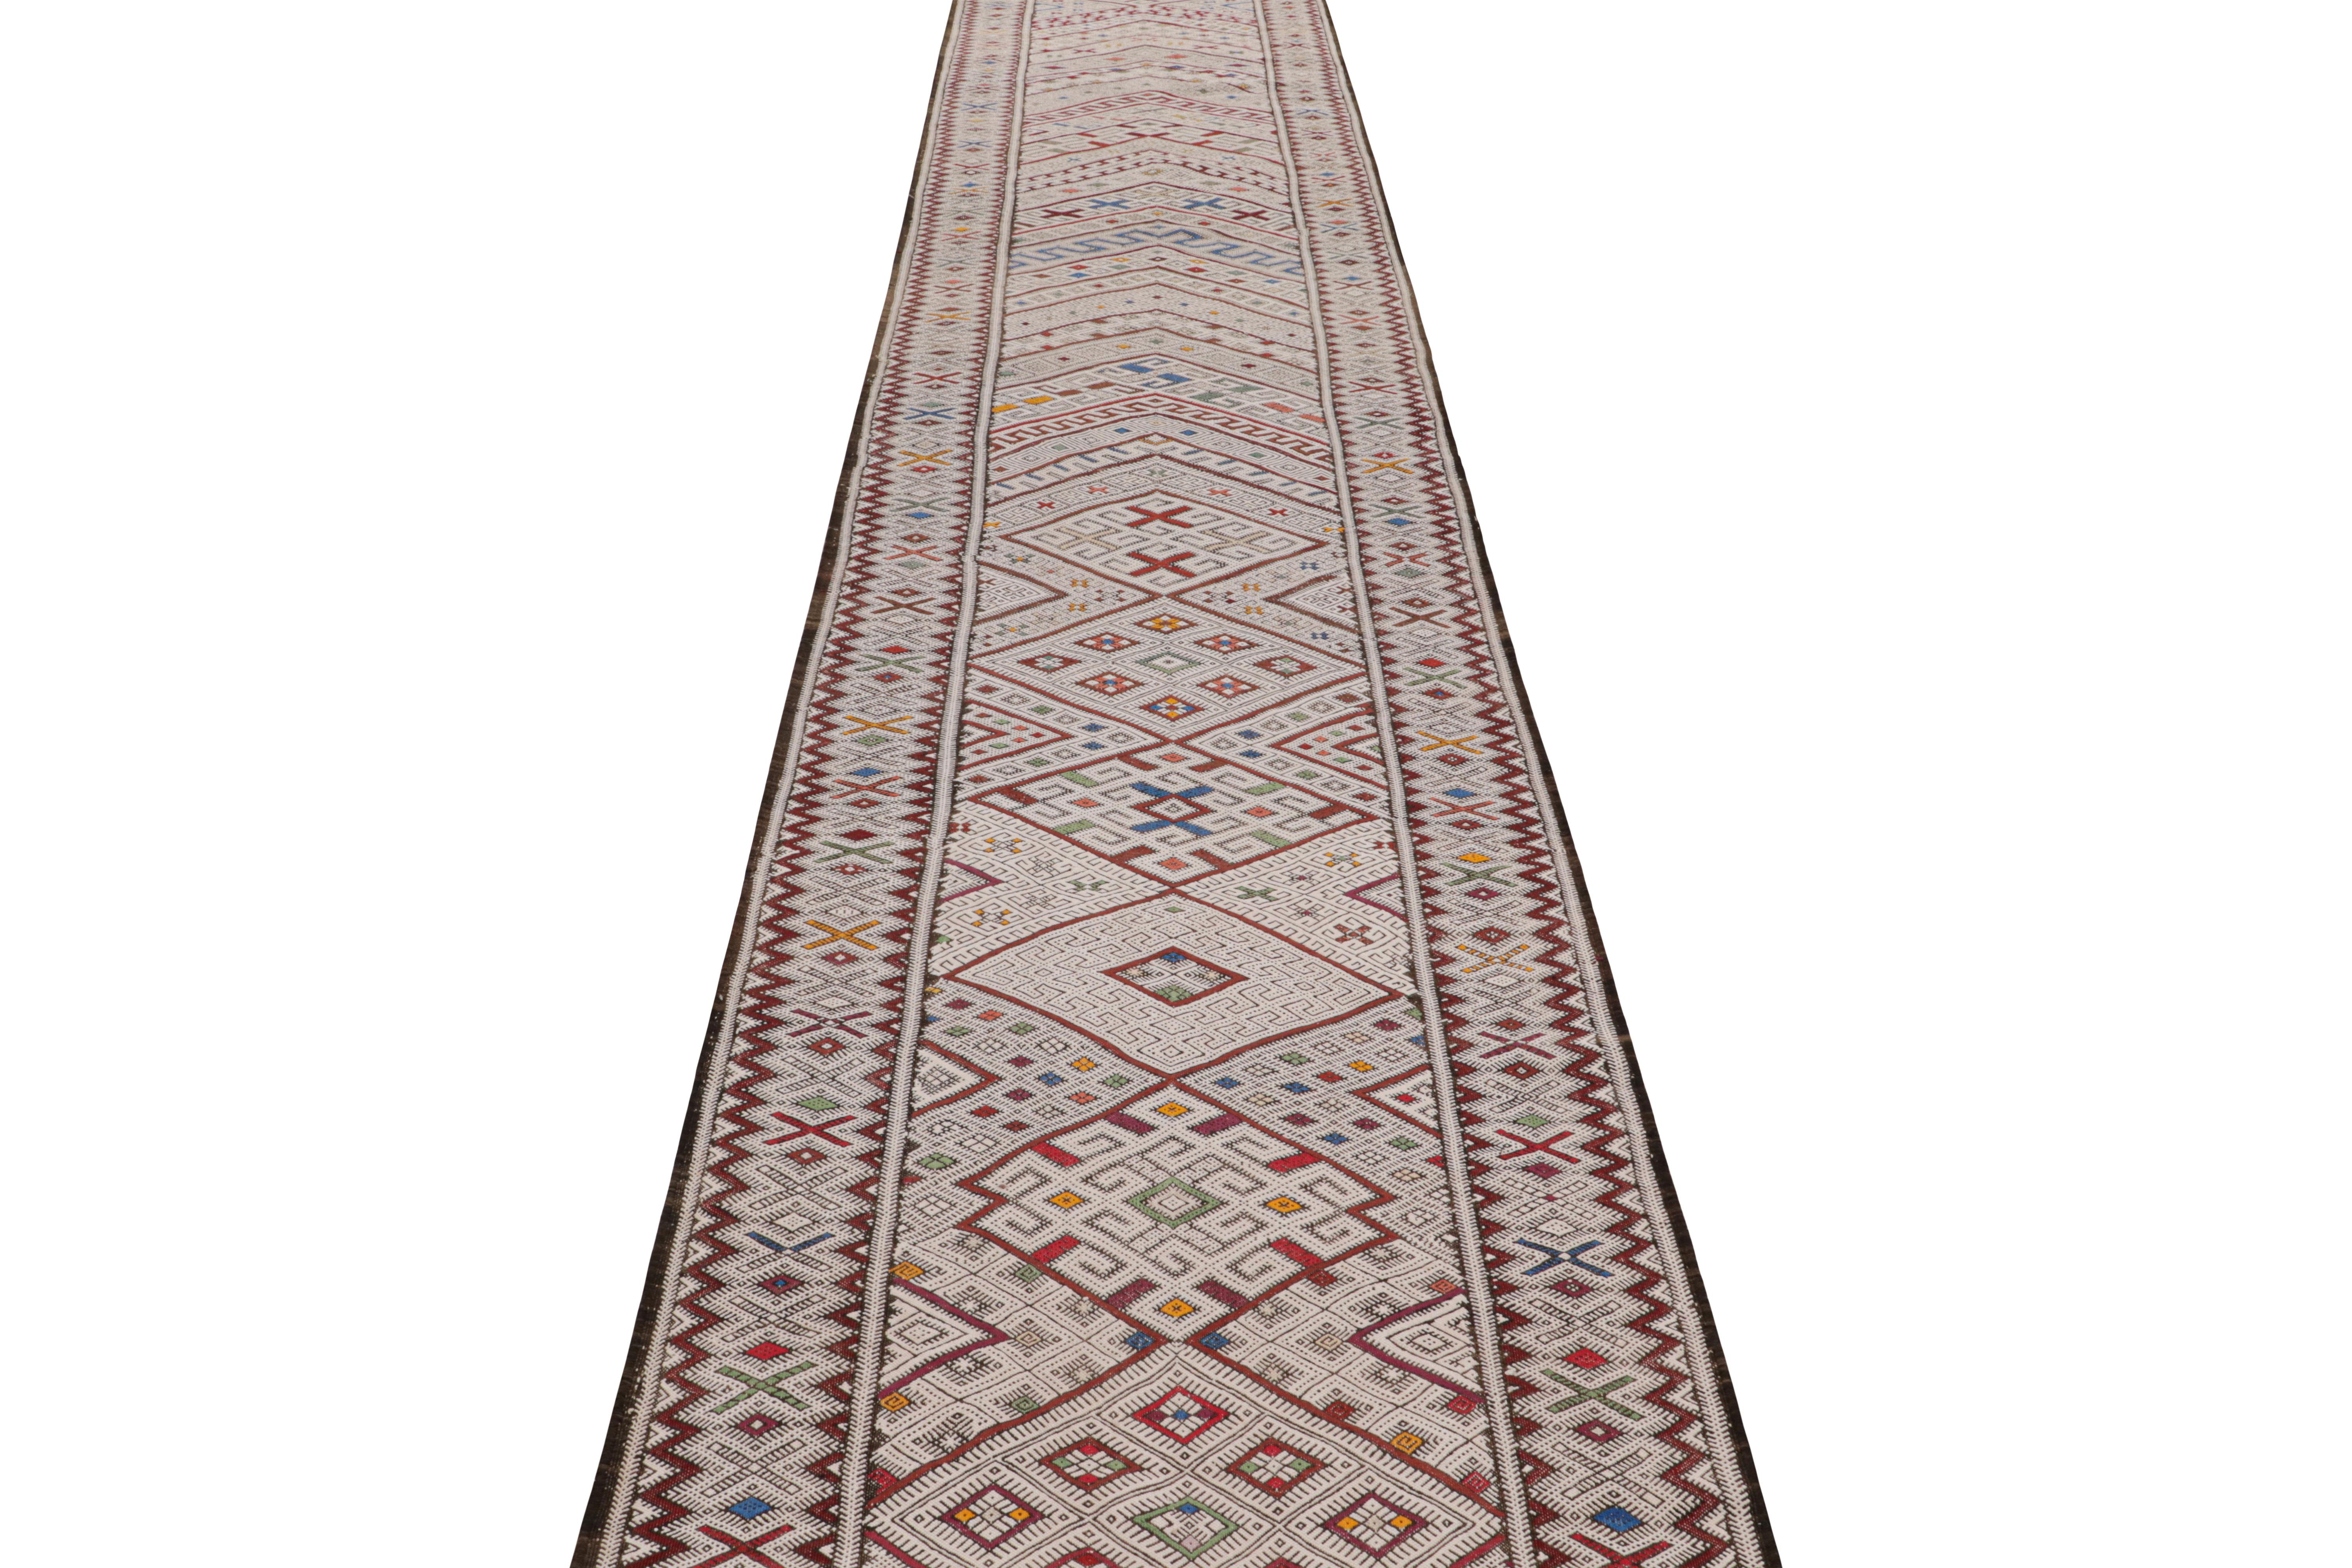 Tribal Vintage Moroccan Kilim Runner with Polychromatic Patterns by Rug & Kilim For Sale